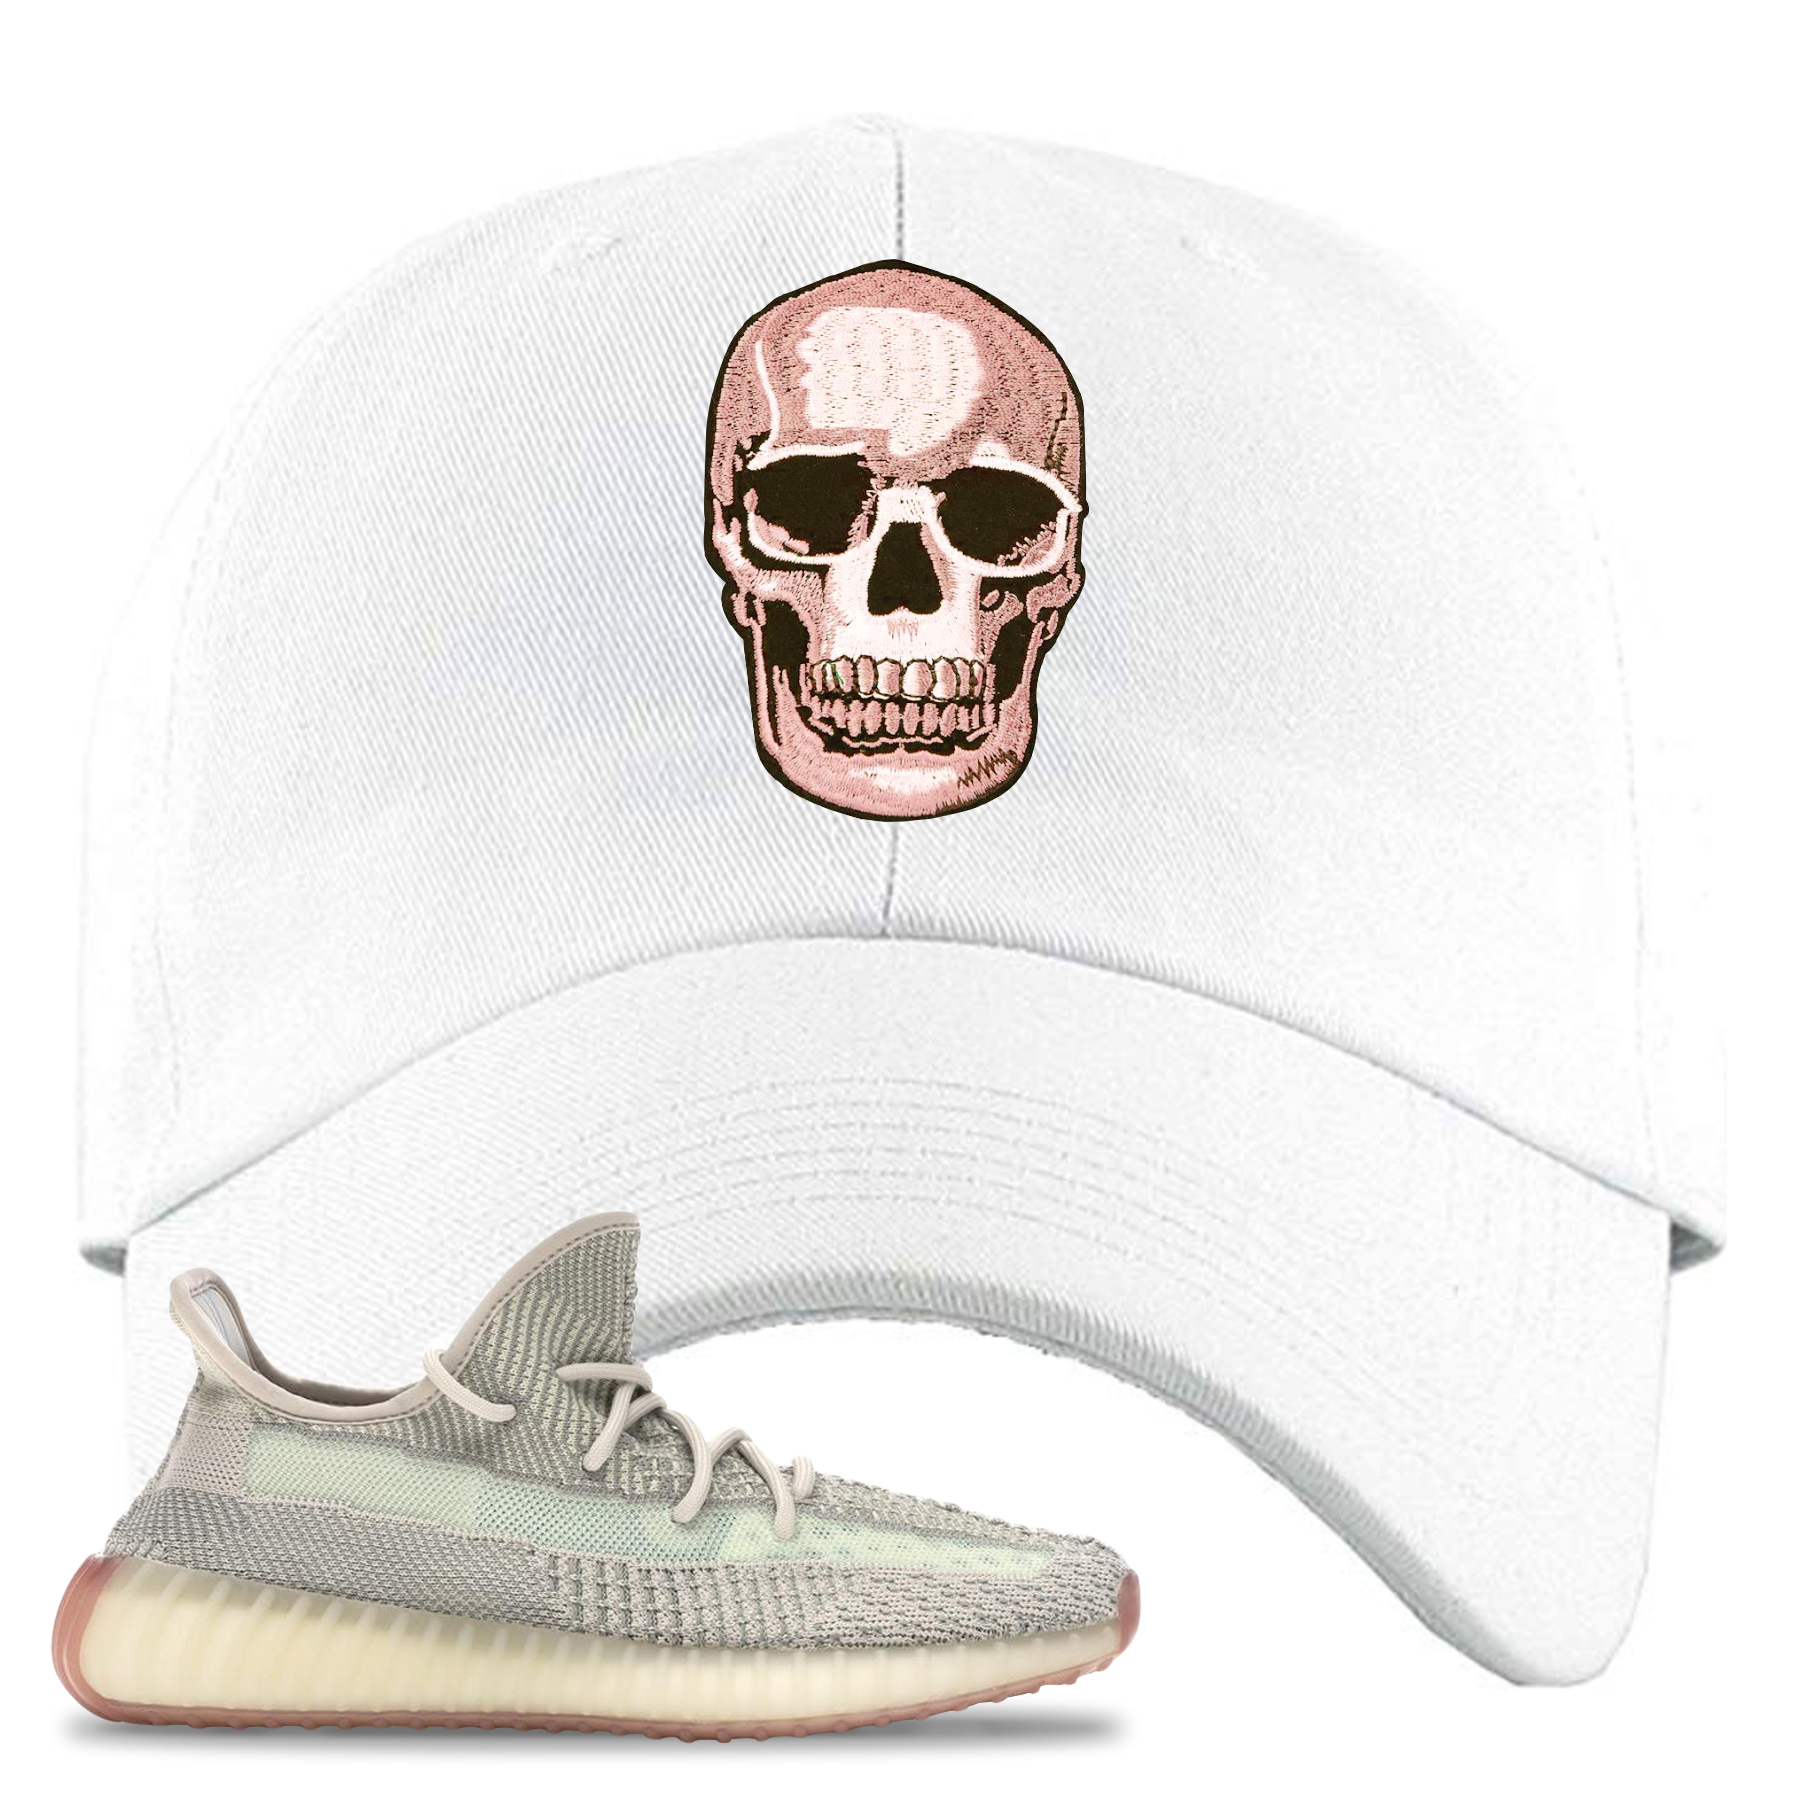 Yeezy Boost 350 V2 Citrin Non-Reflective Skull White Sneaker Matching Dad Hat